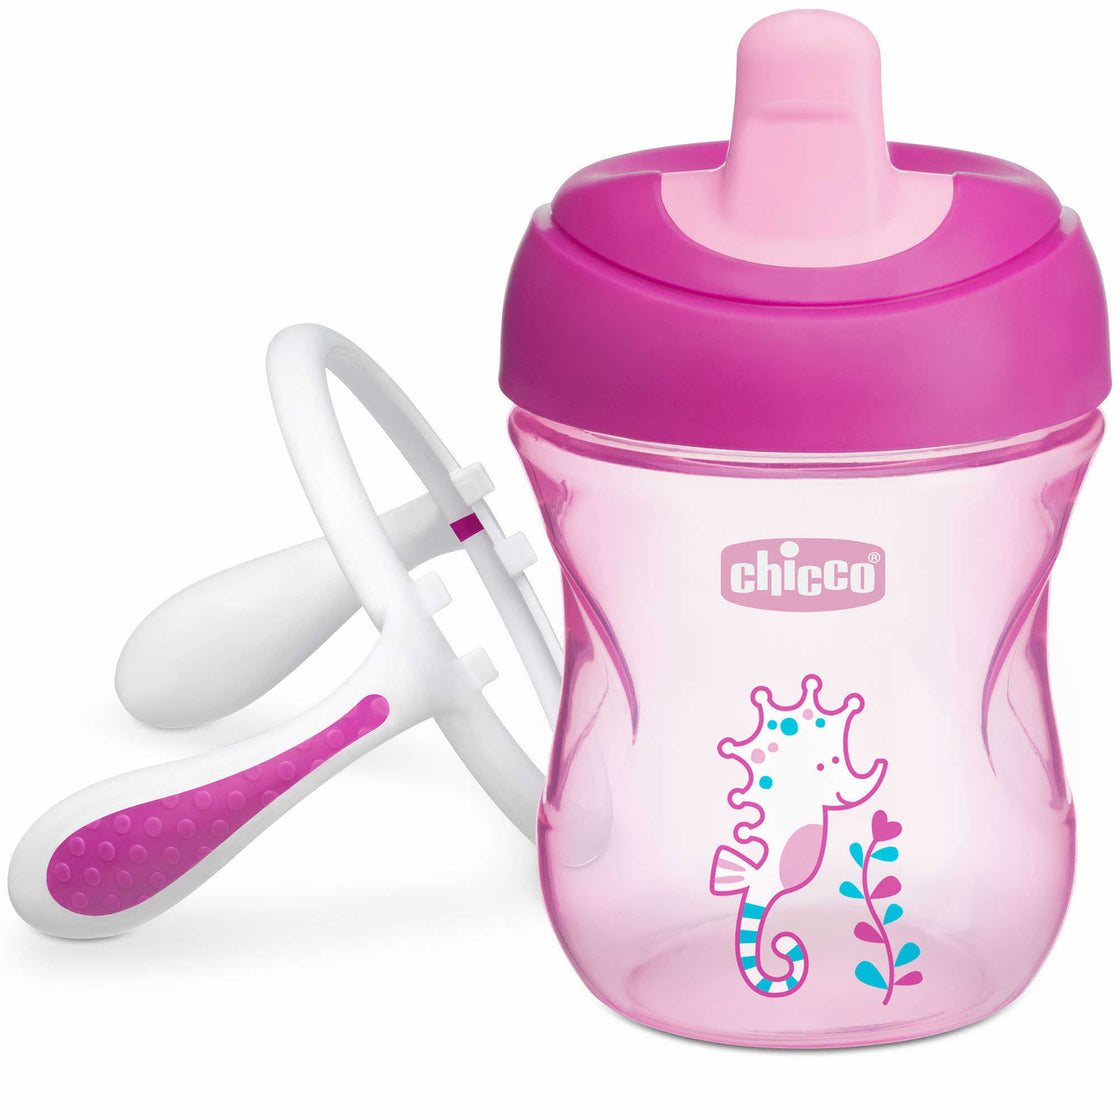 Chicco Training Cup 6M+, Pink – 200ml